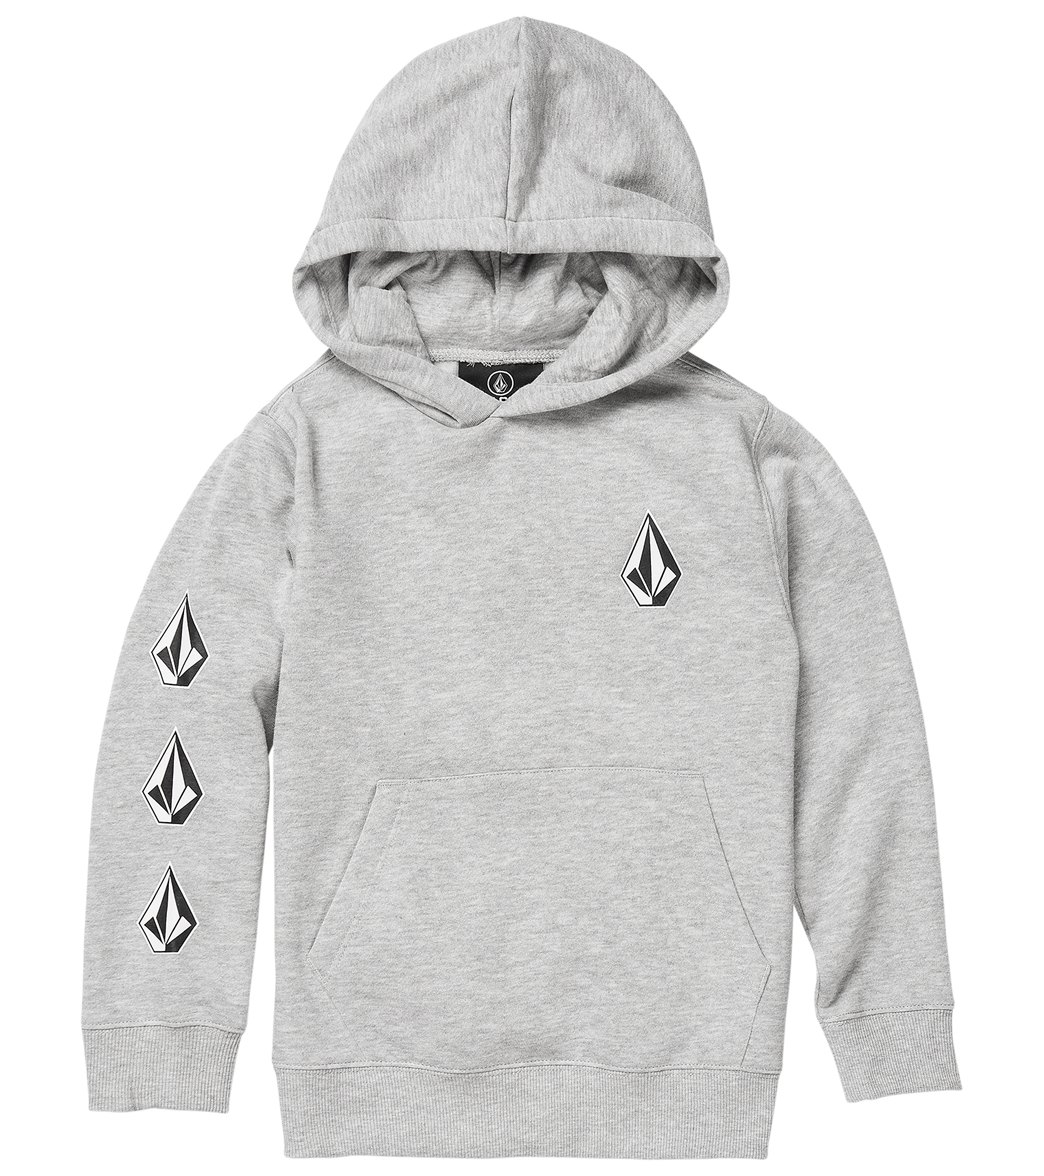 Volcom Boys' Iconic Stone Pullover Hoodie Toddler - Heather Grey 7 Cotton/Polyester - Swimoutlet.com